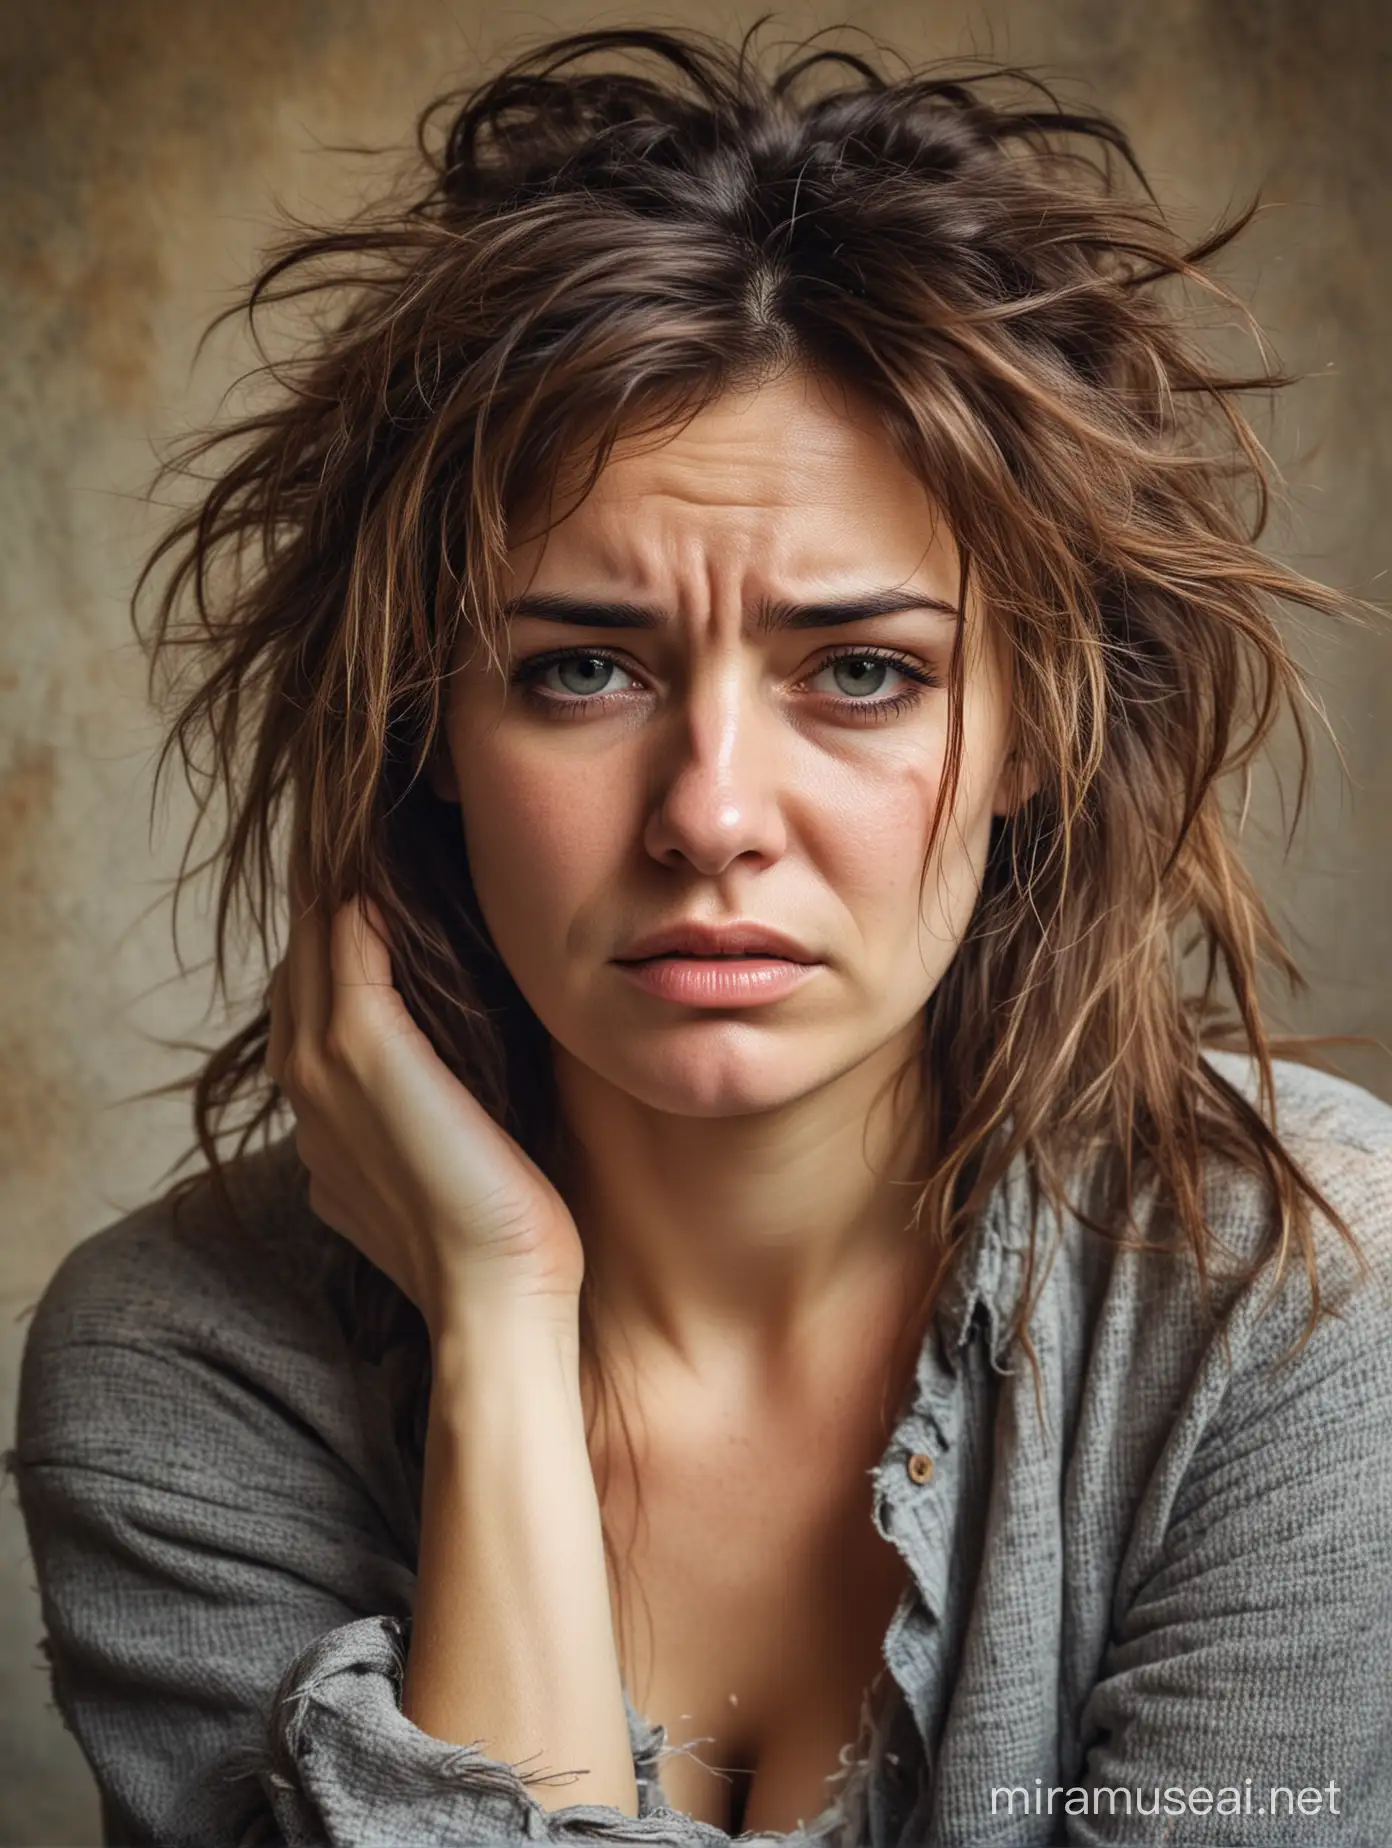 Rustic Woman with Disheveled Hair Expressing Sadness